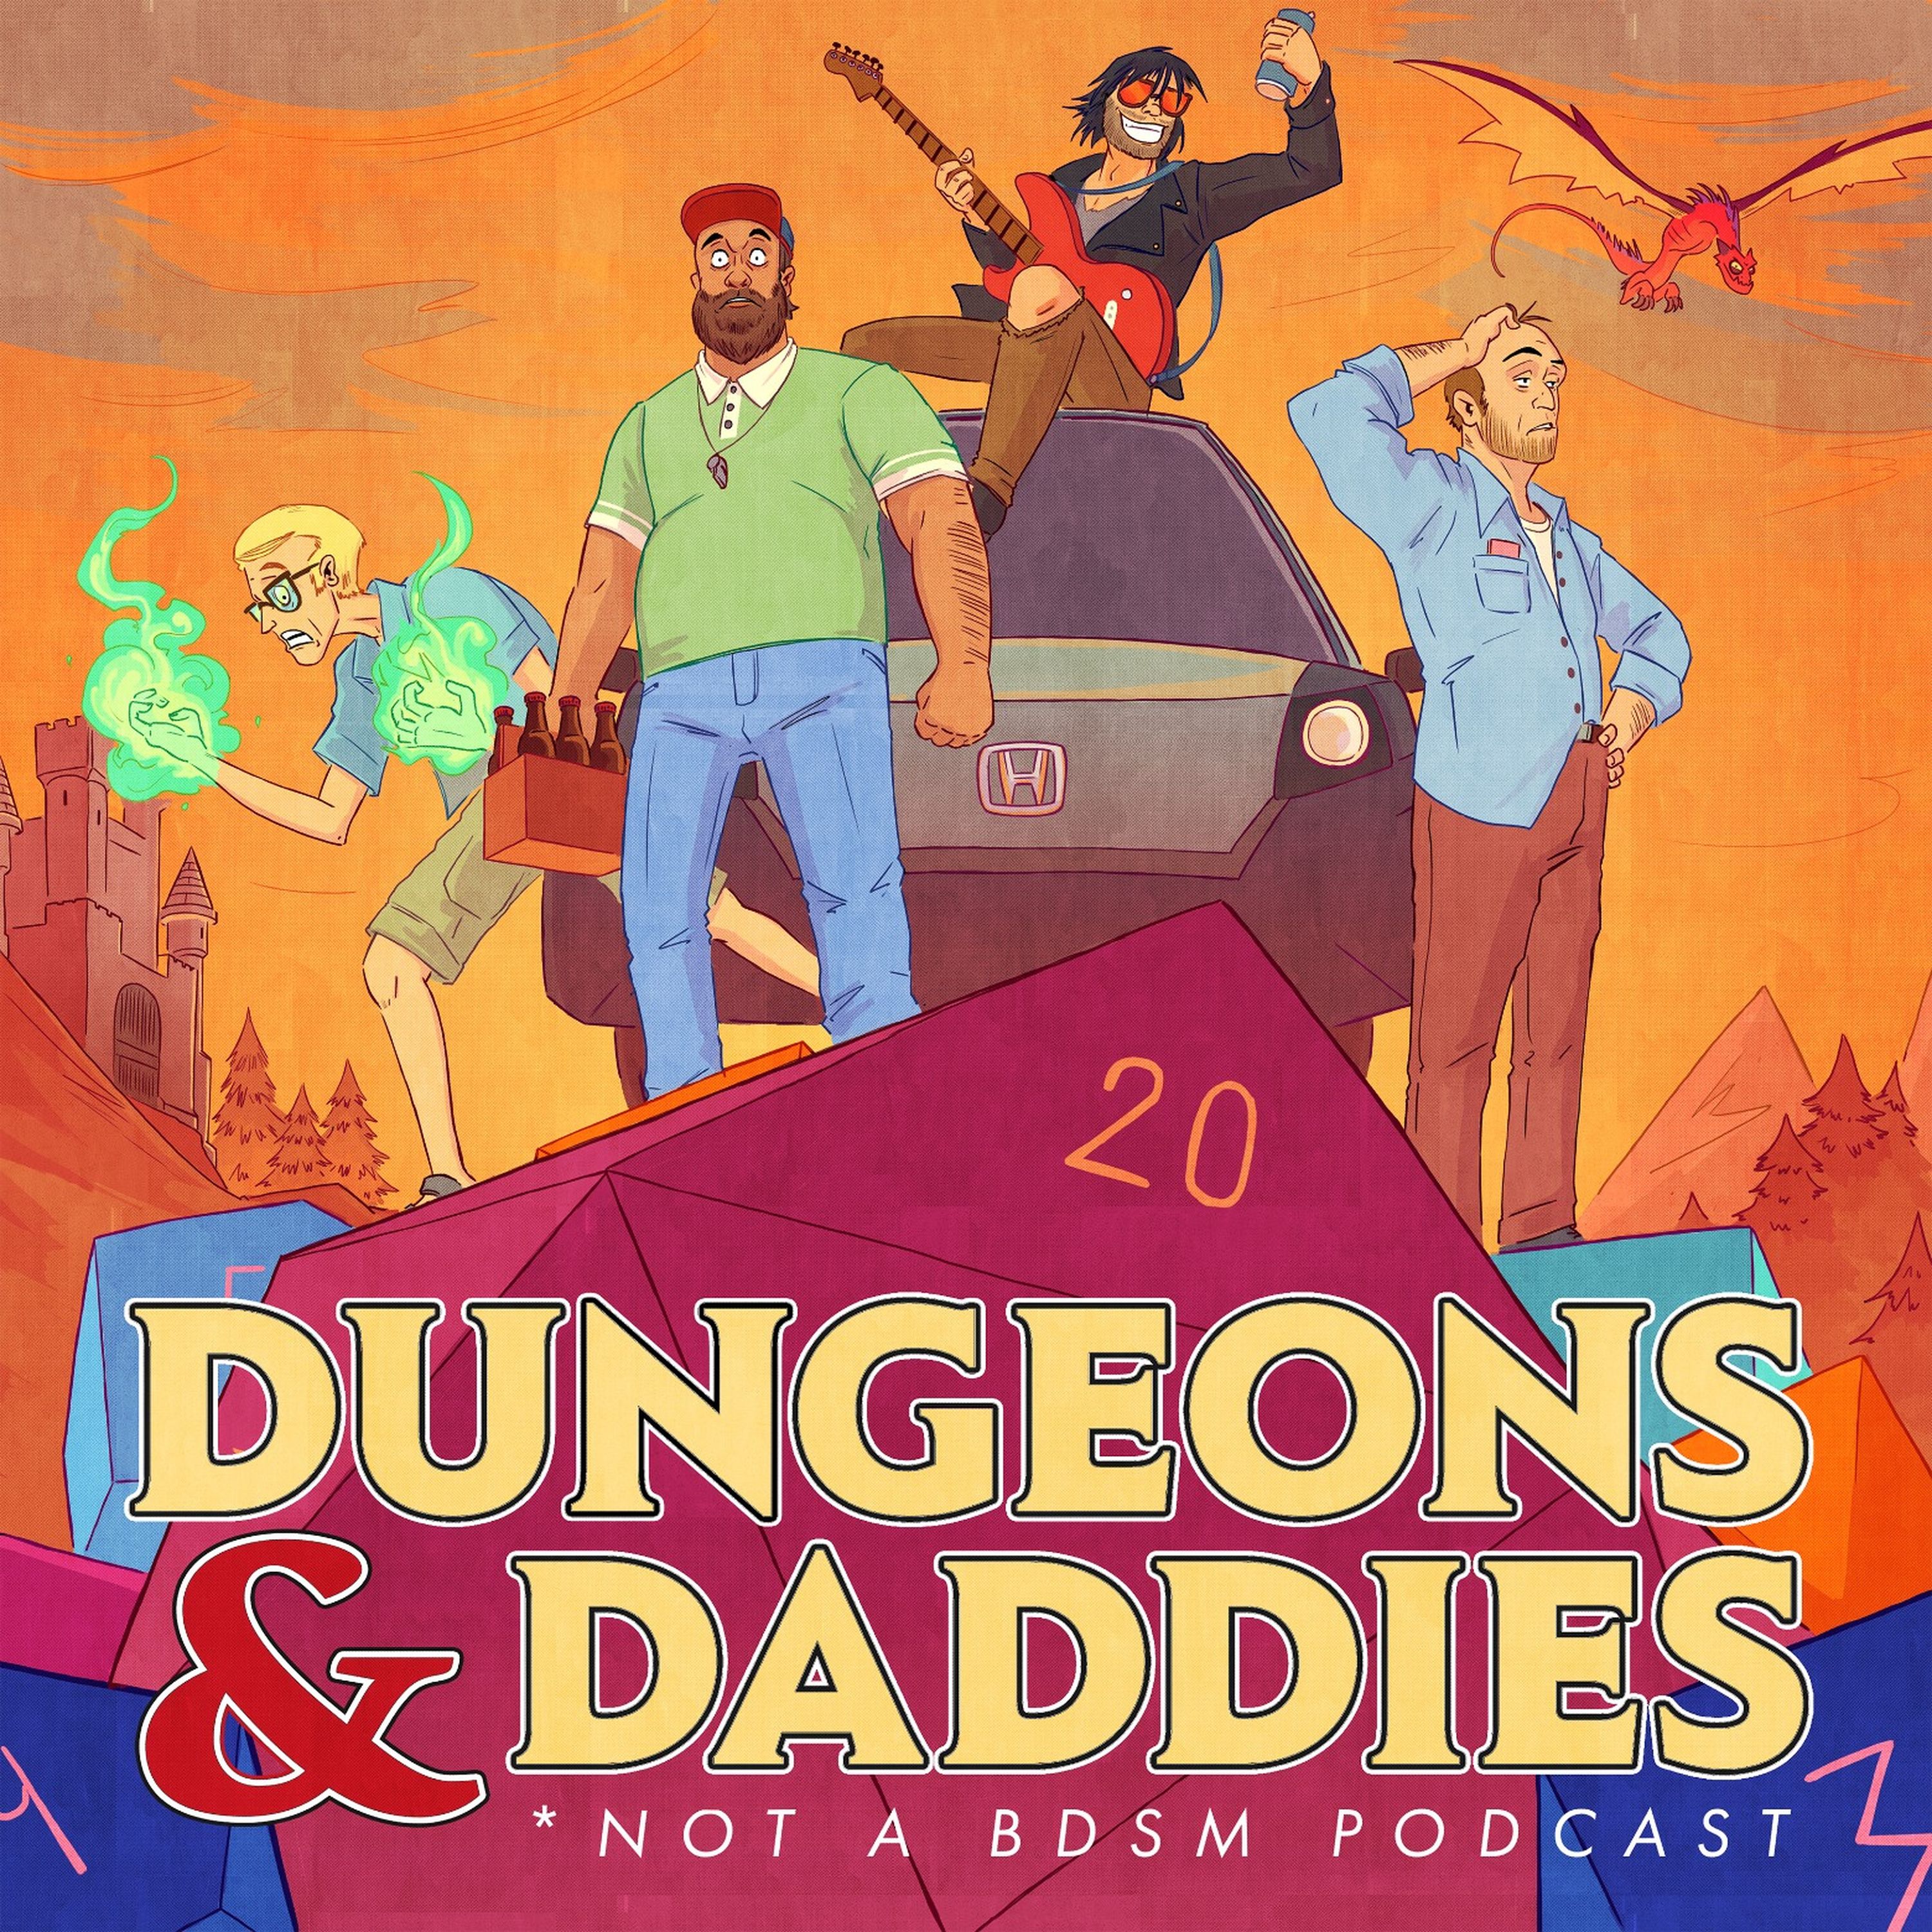 Ep. 12 - A Tale of Two Daddies